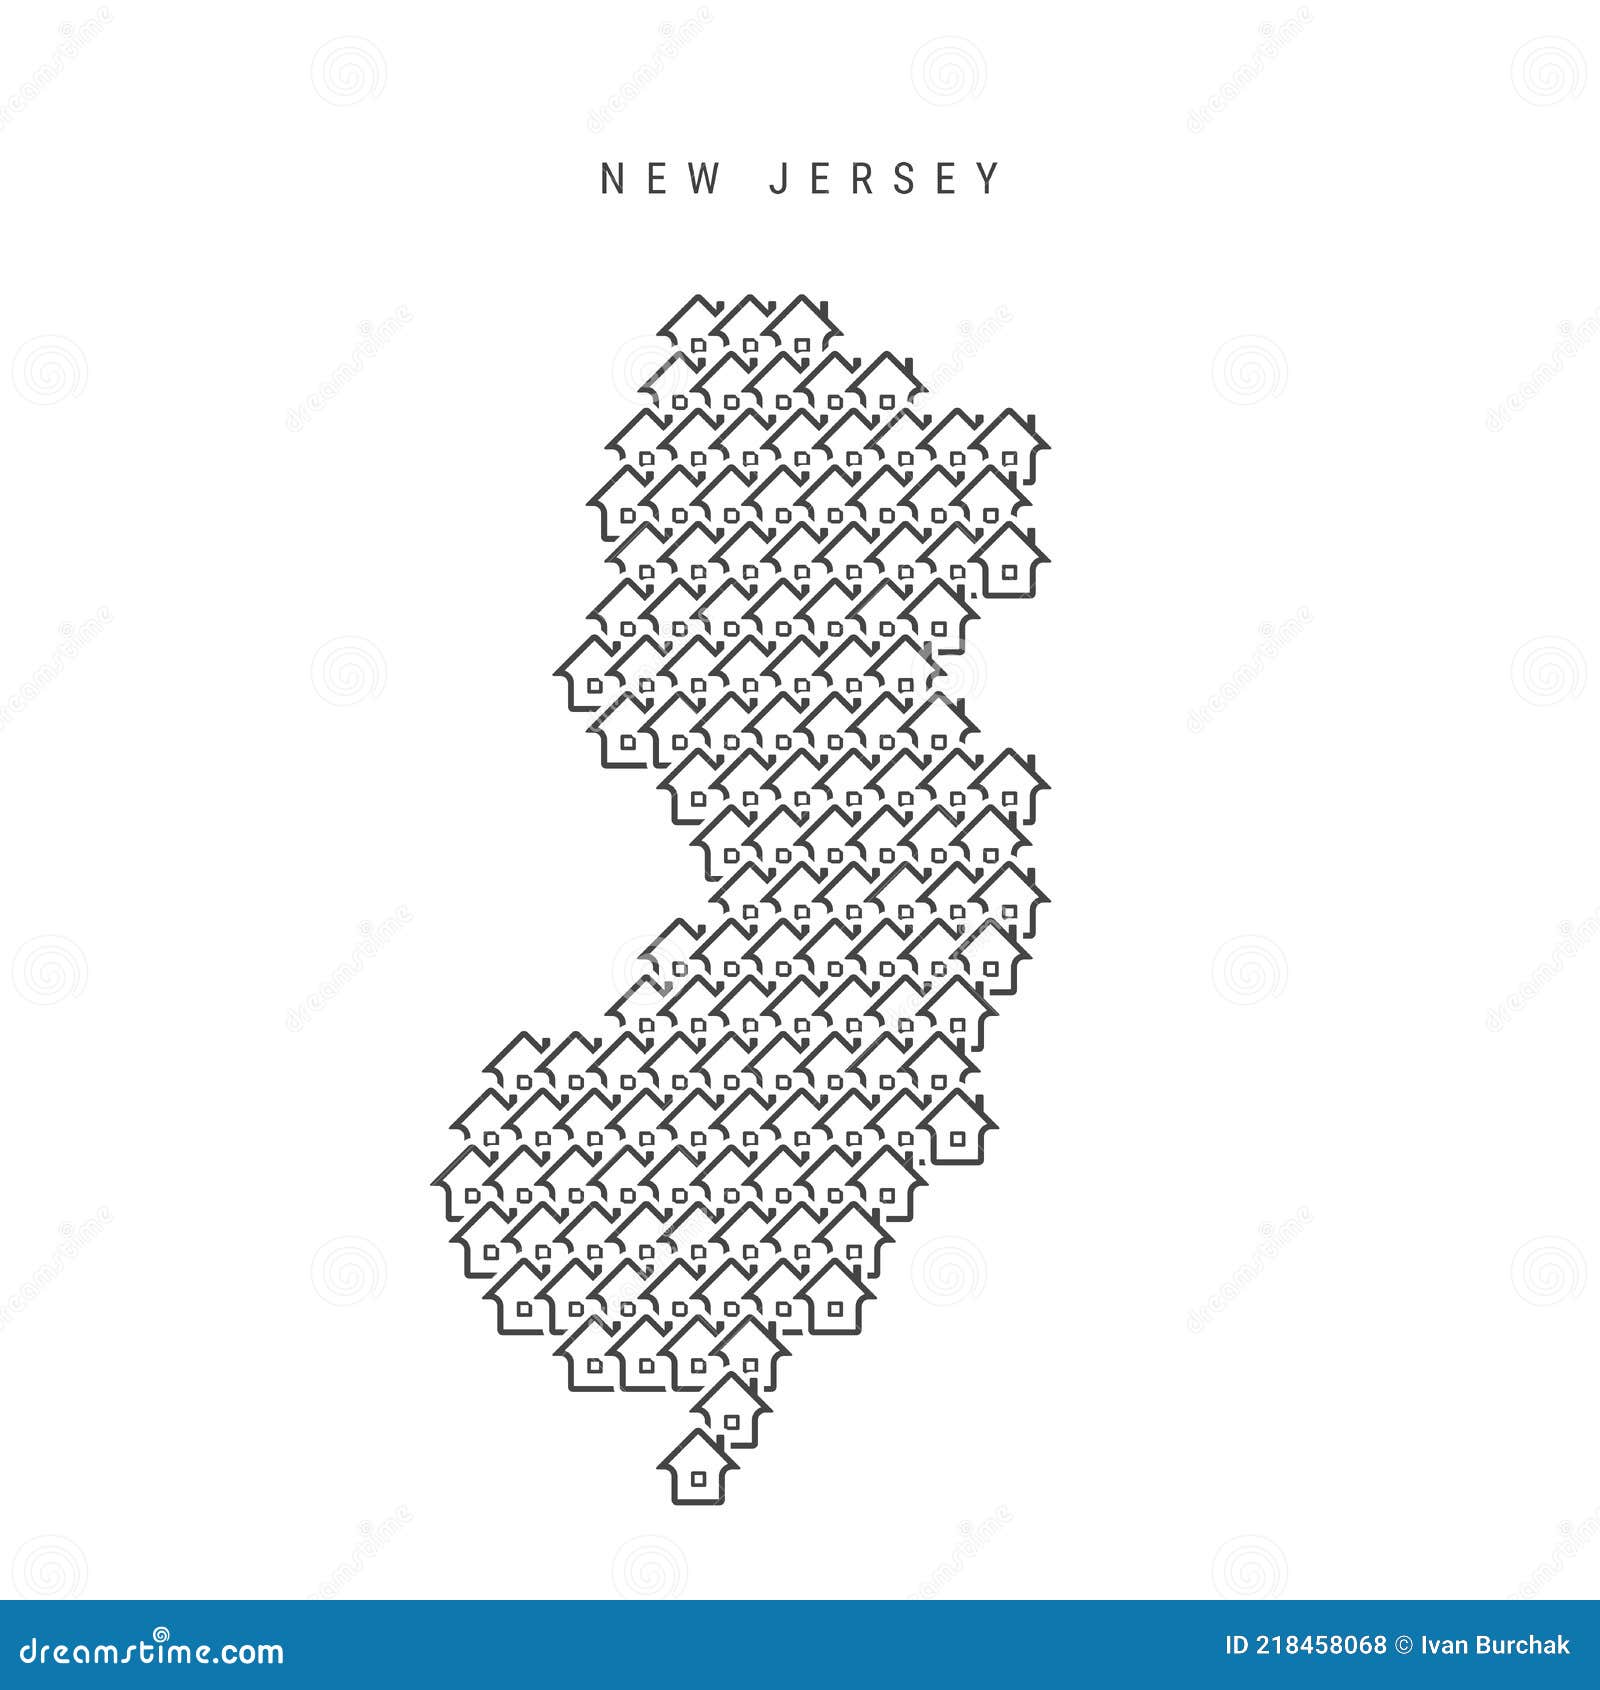 New Jersey Real Estate Property Map. Icons of Houses in the Shape of a ...